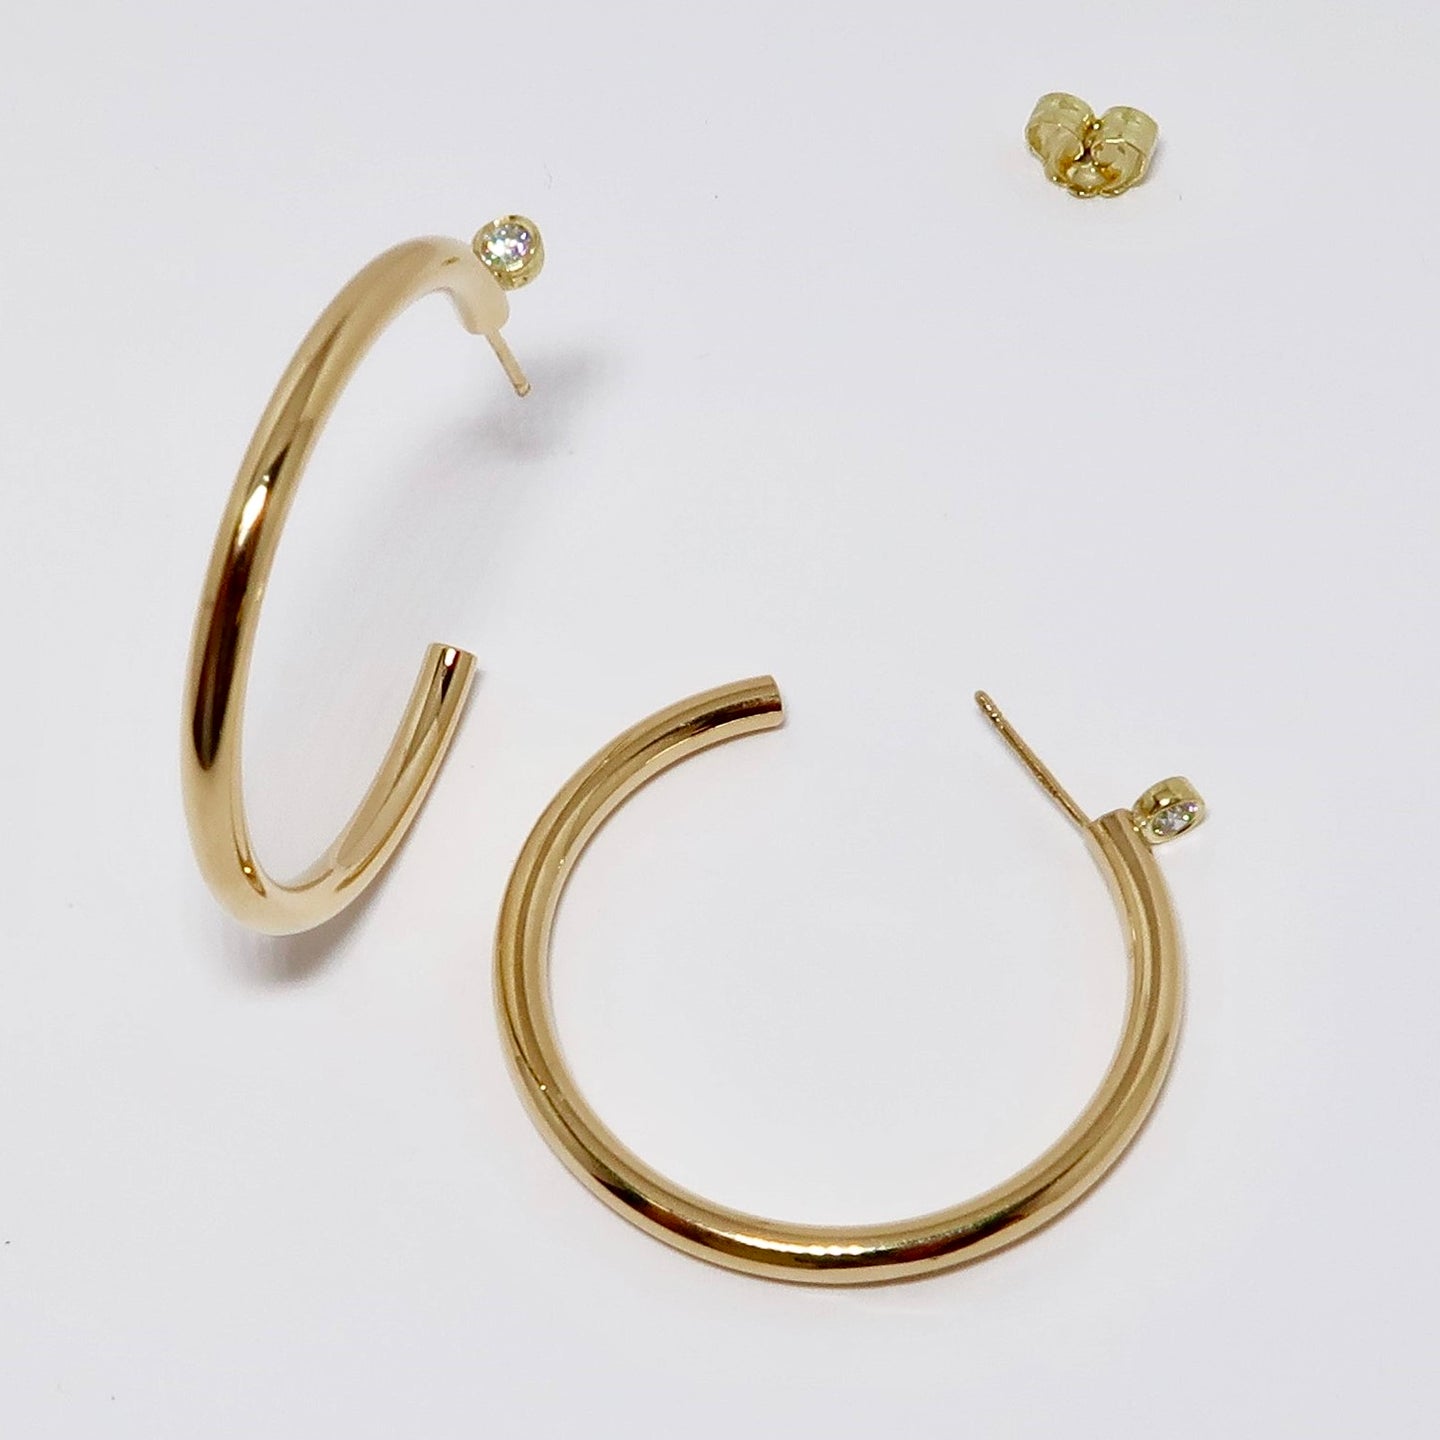 18k Yellow Gold Round Hoop Earrings with Diamond at Post